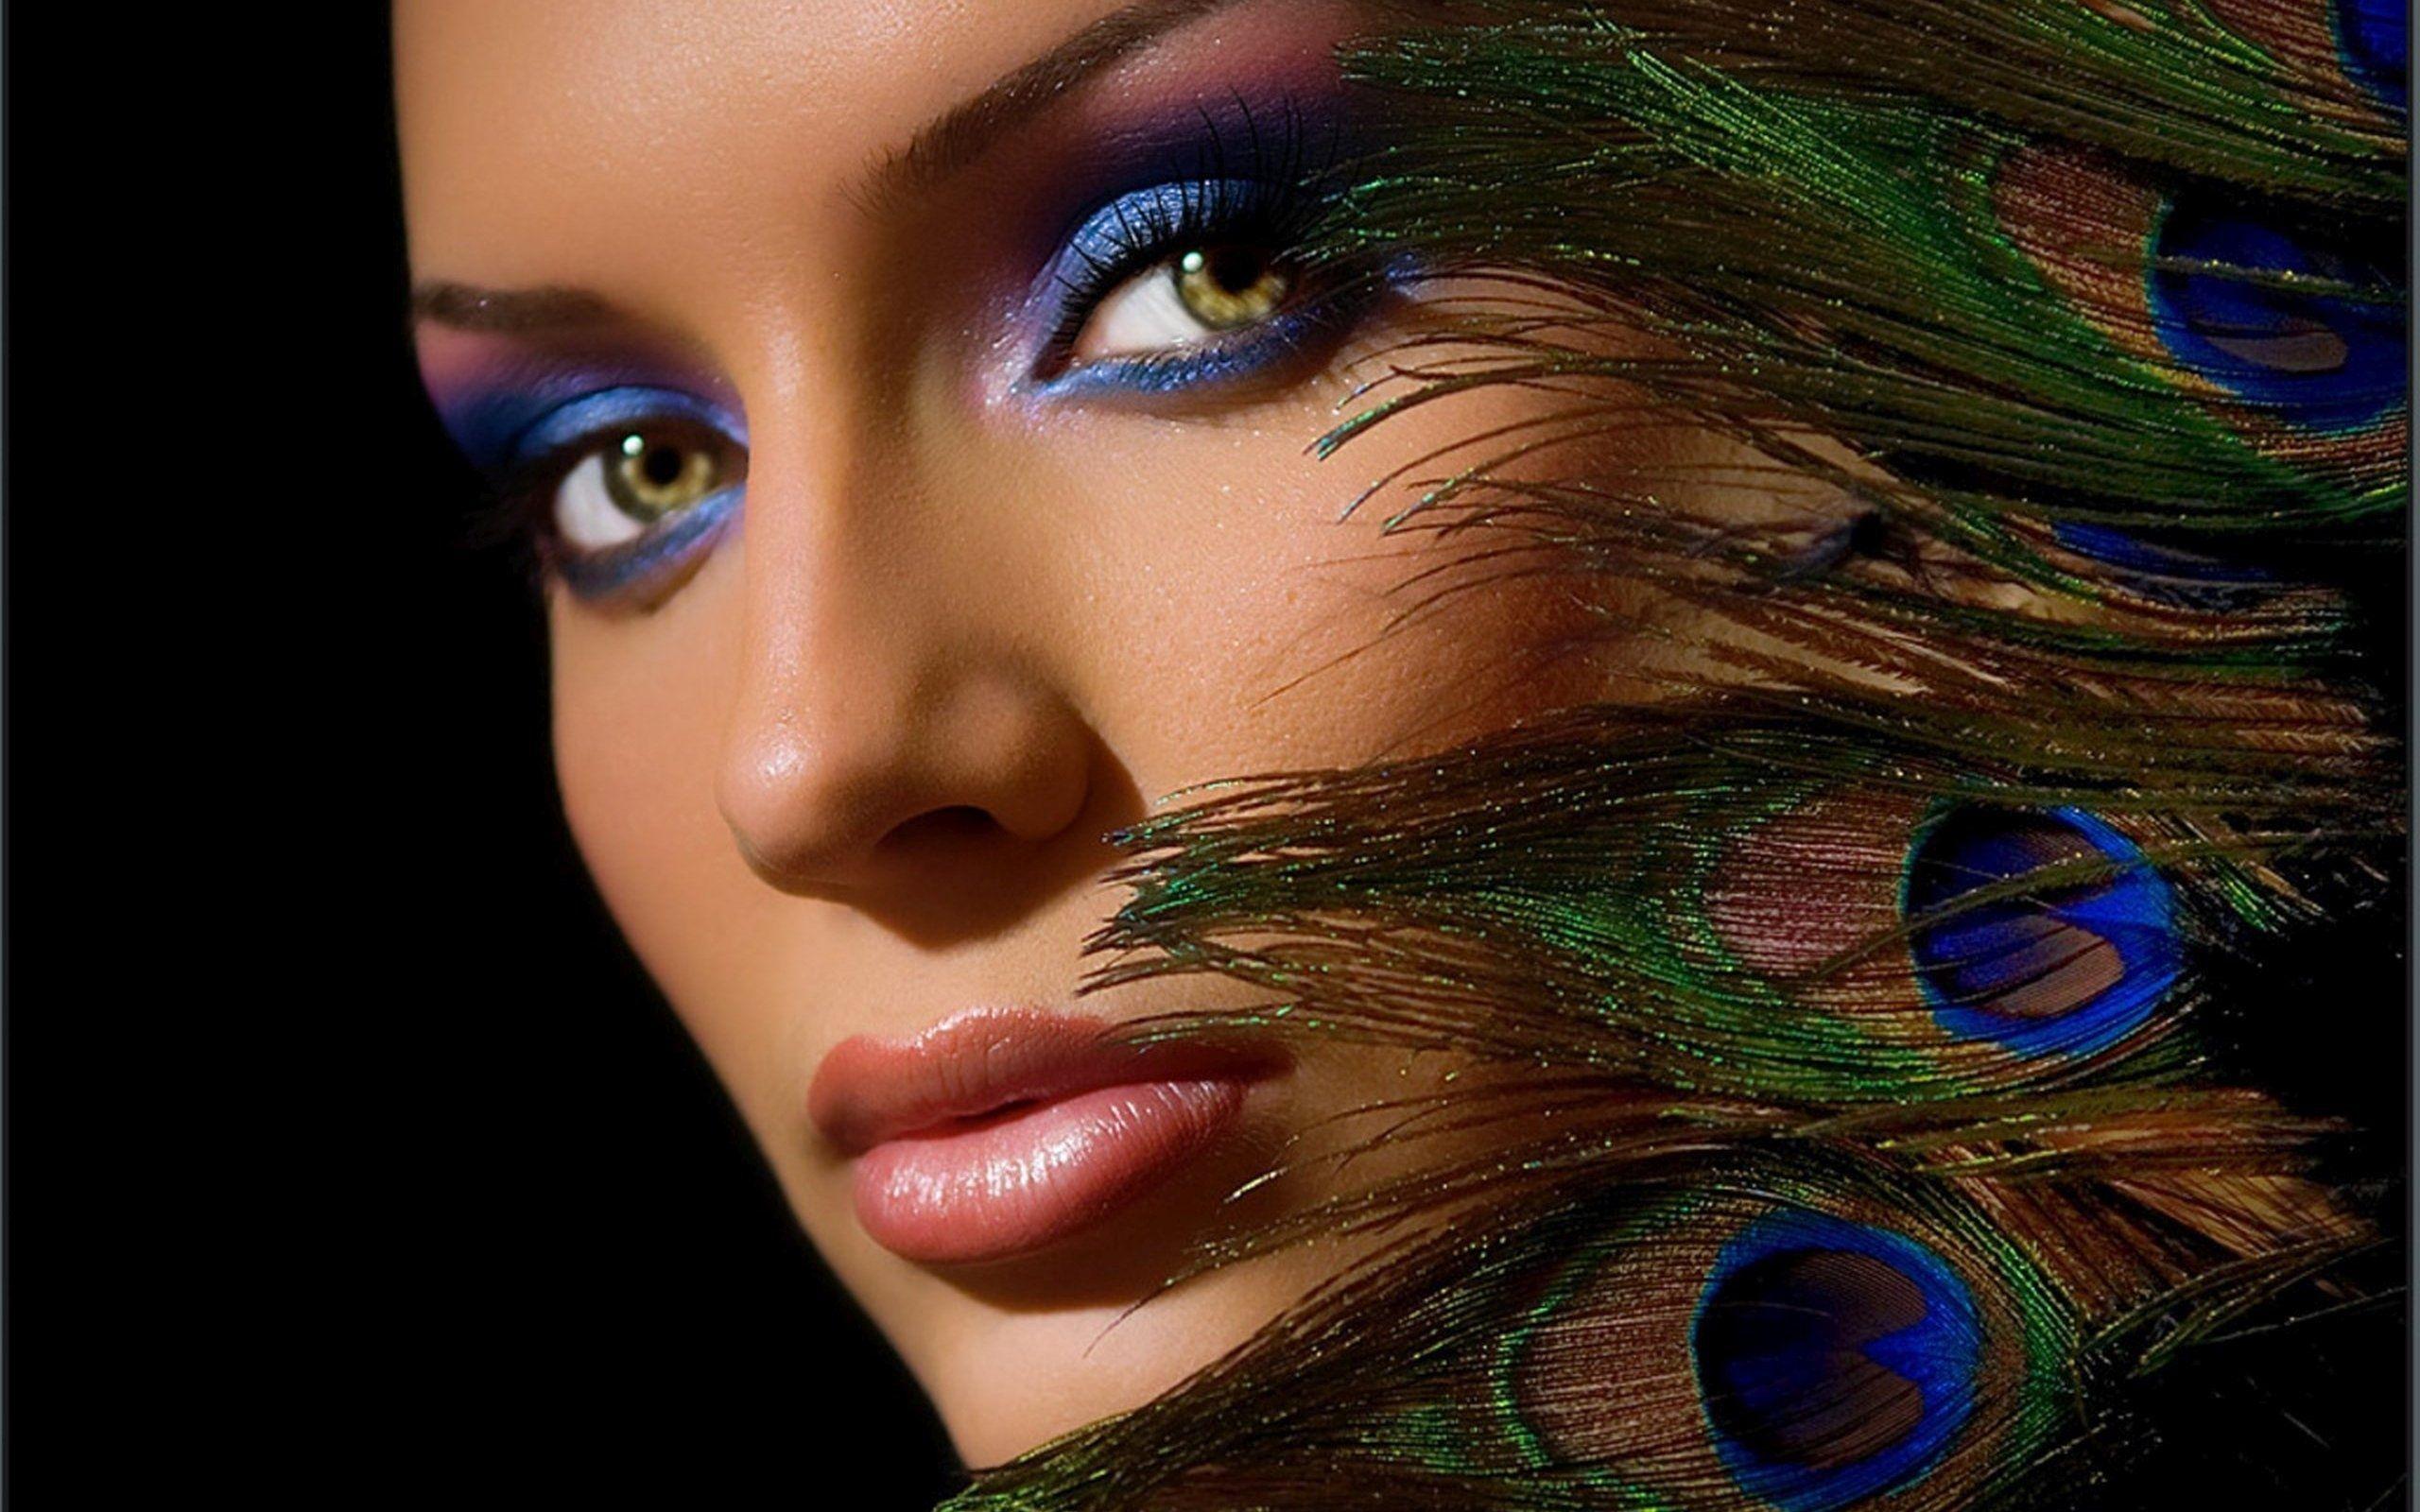 Pretty, Peacock Feathers, Beautiful Woman, Makeup, Face